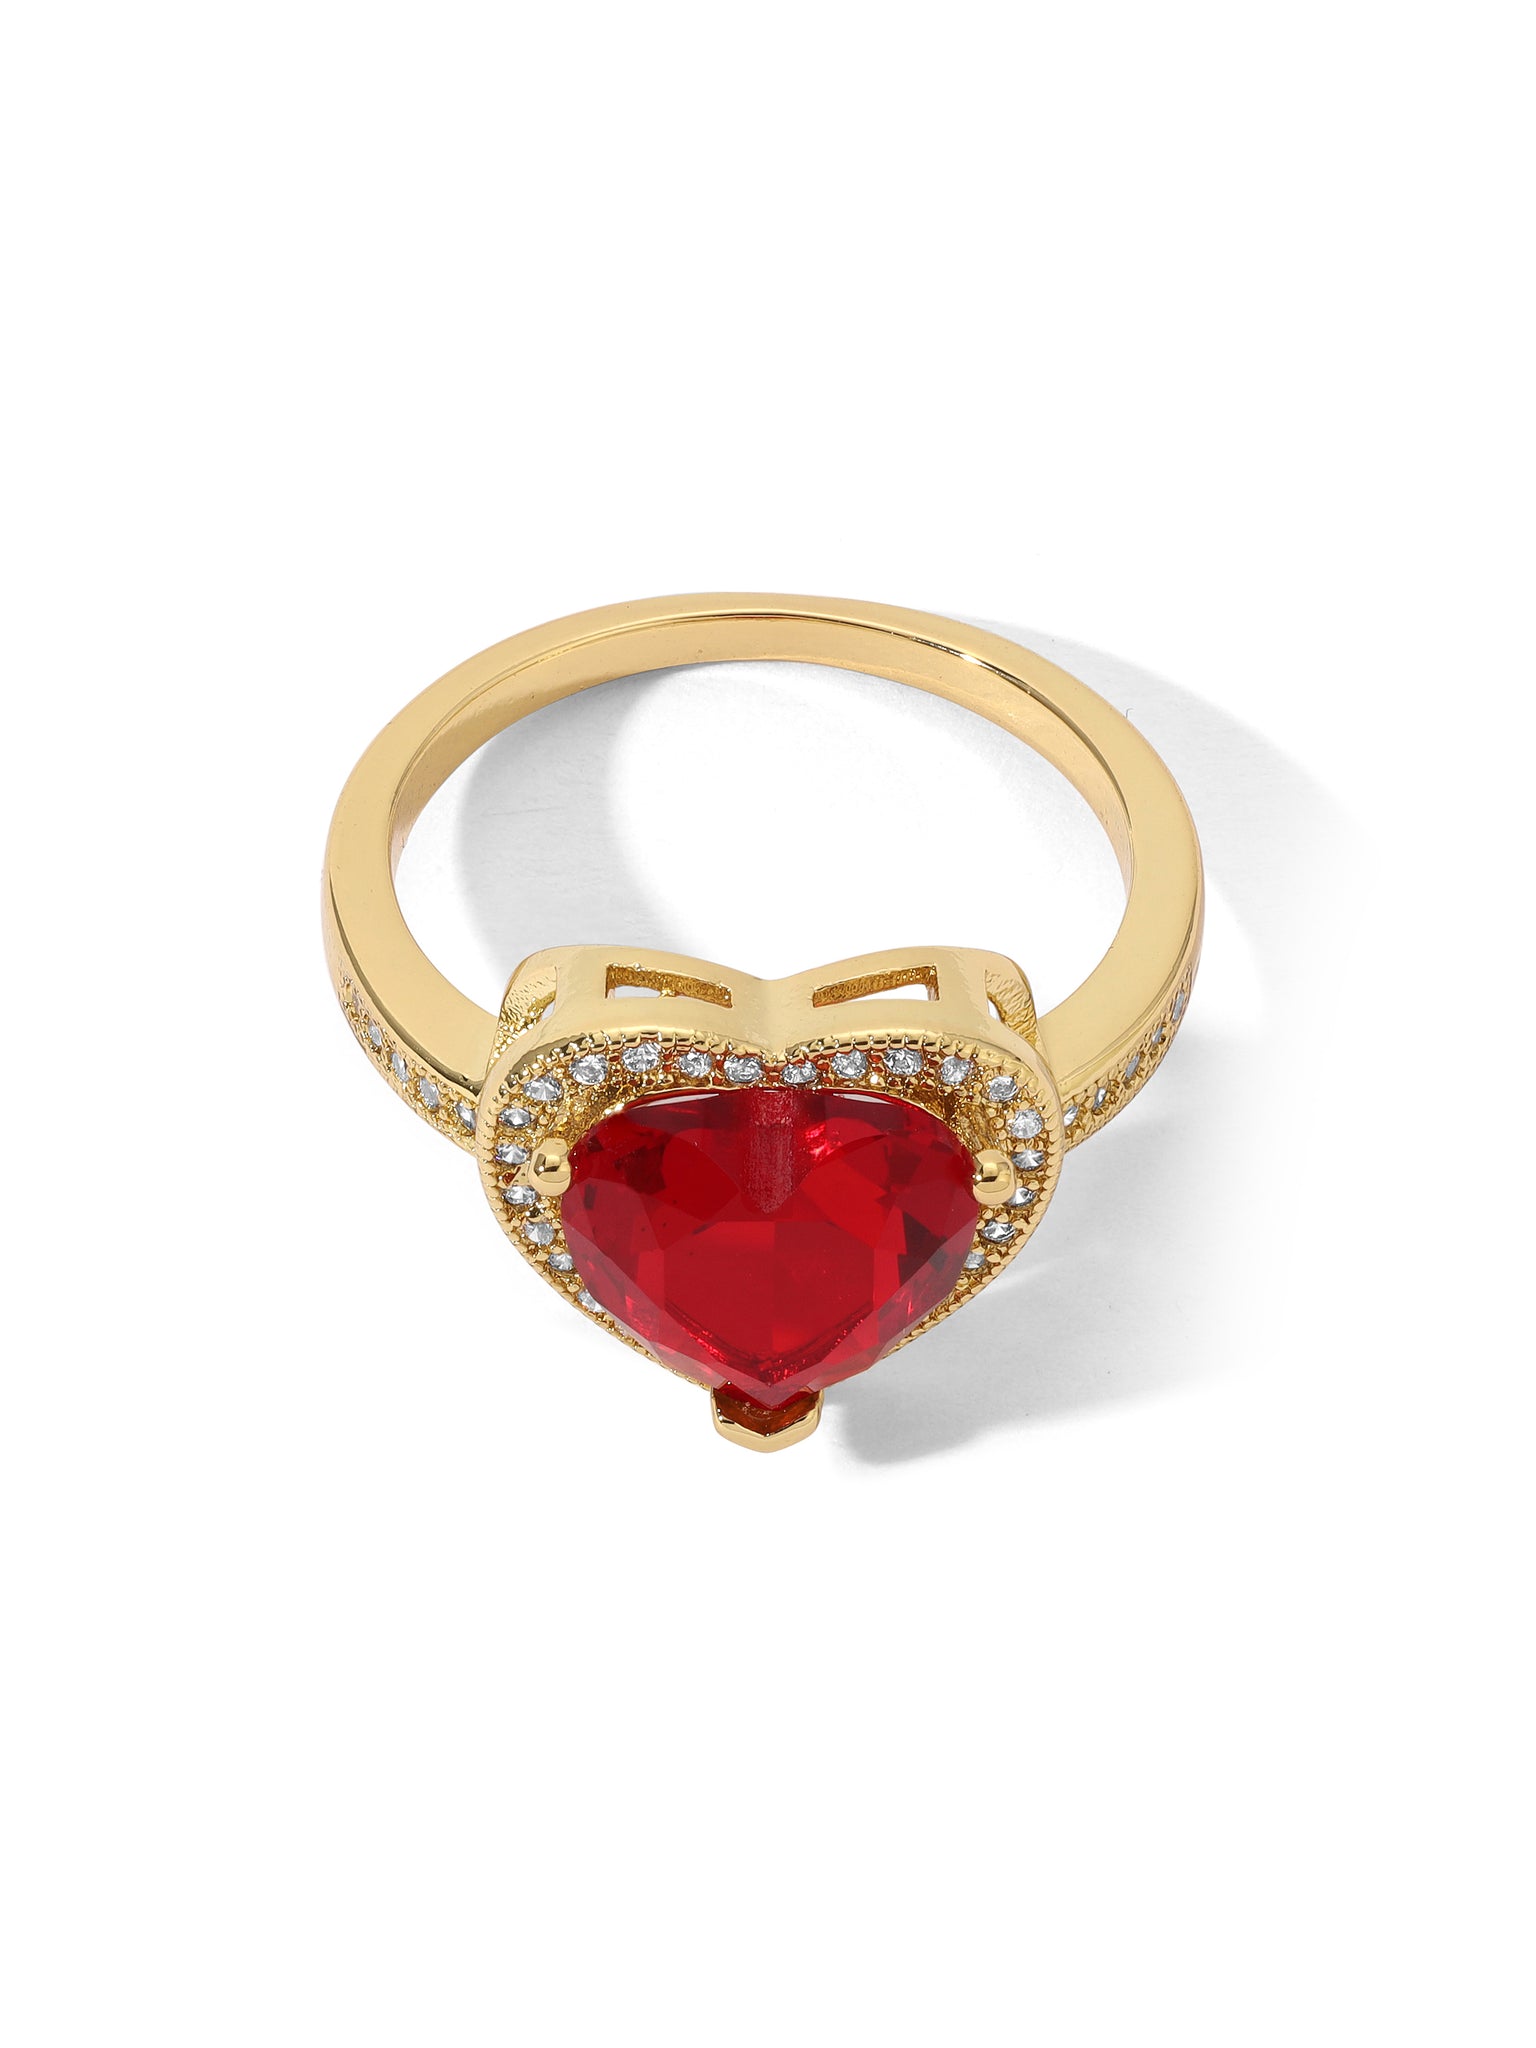 The Cherry Heart Ring